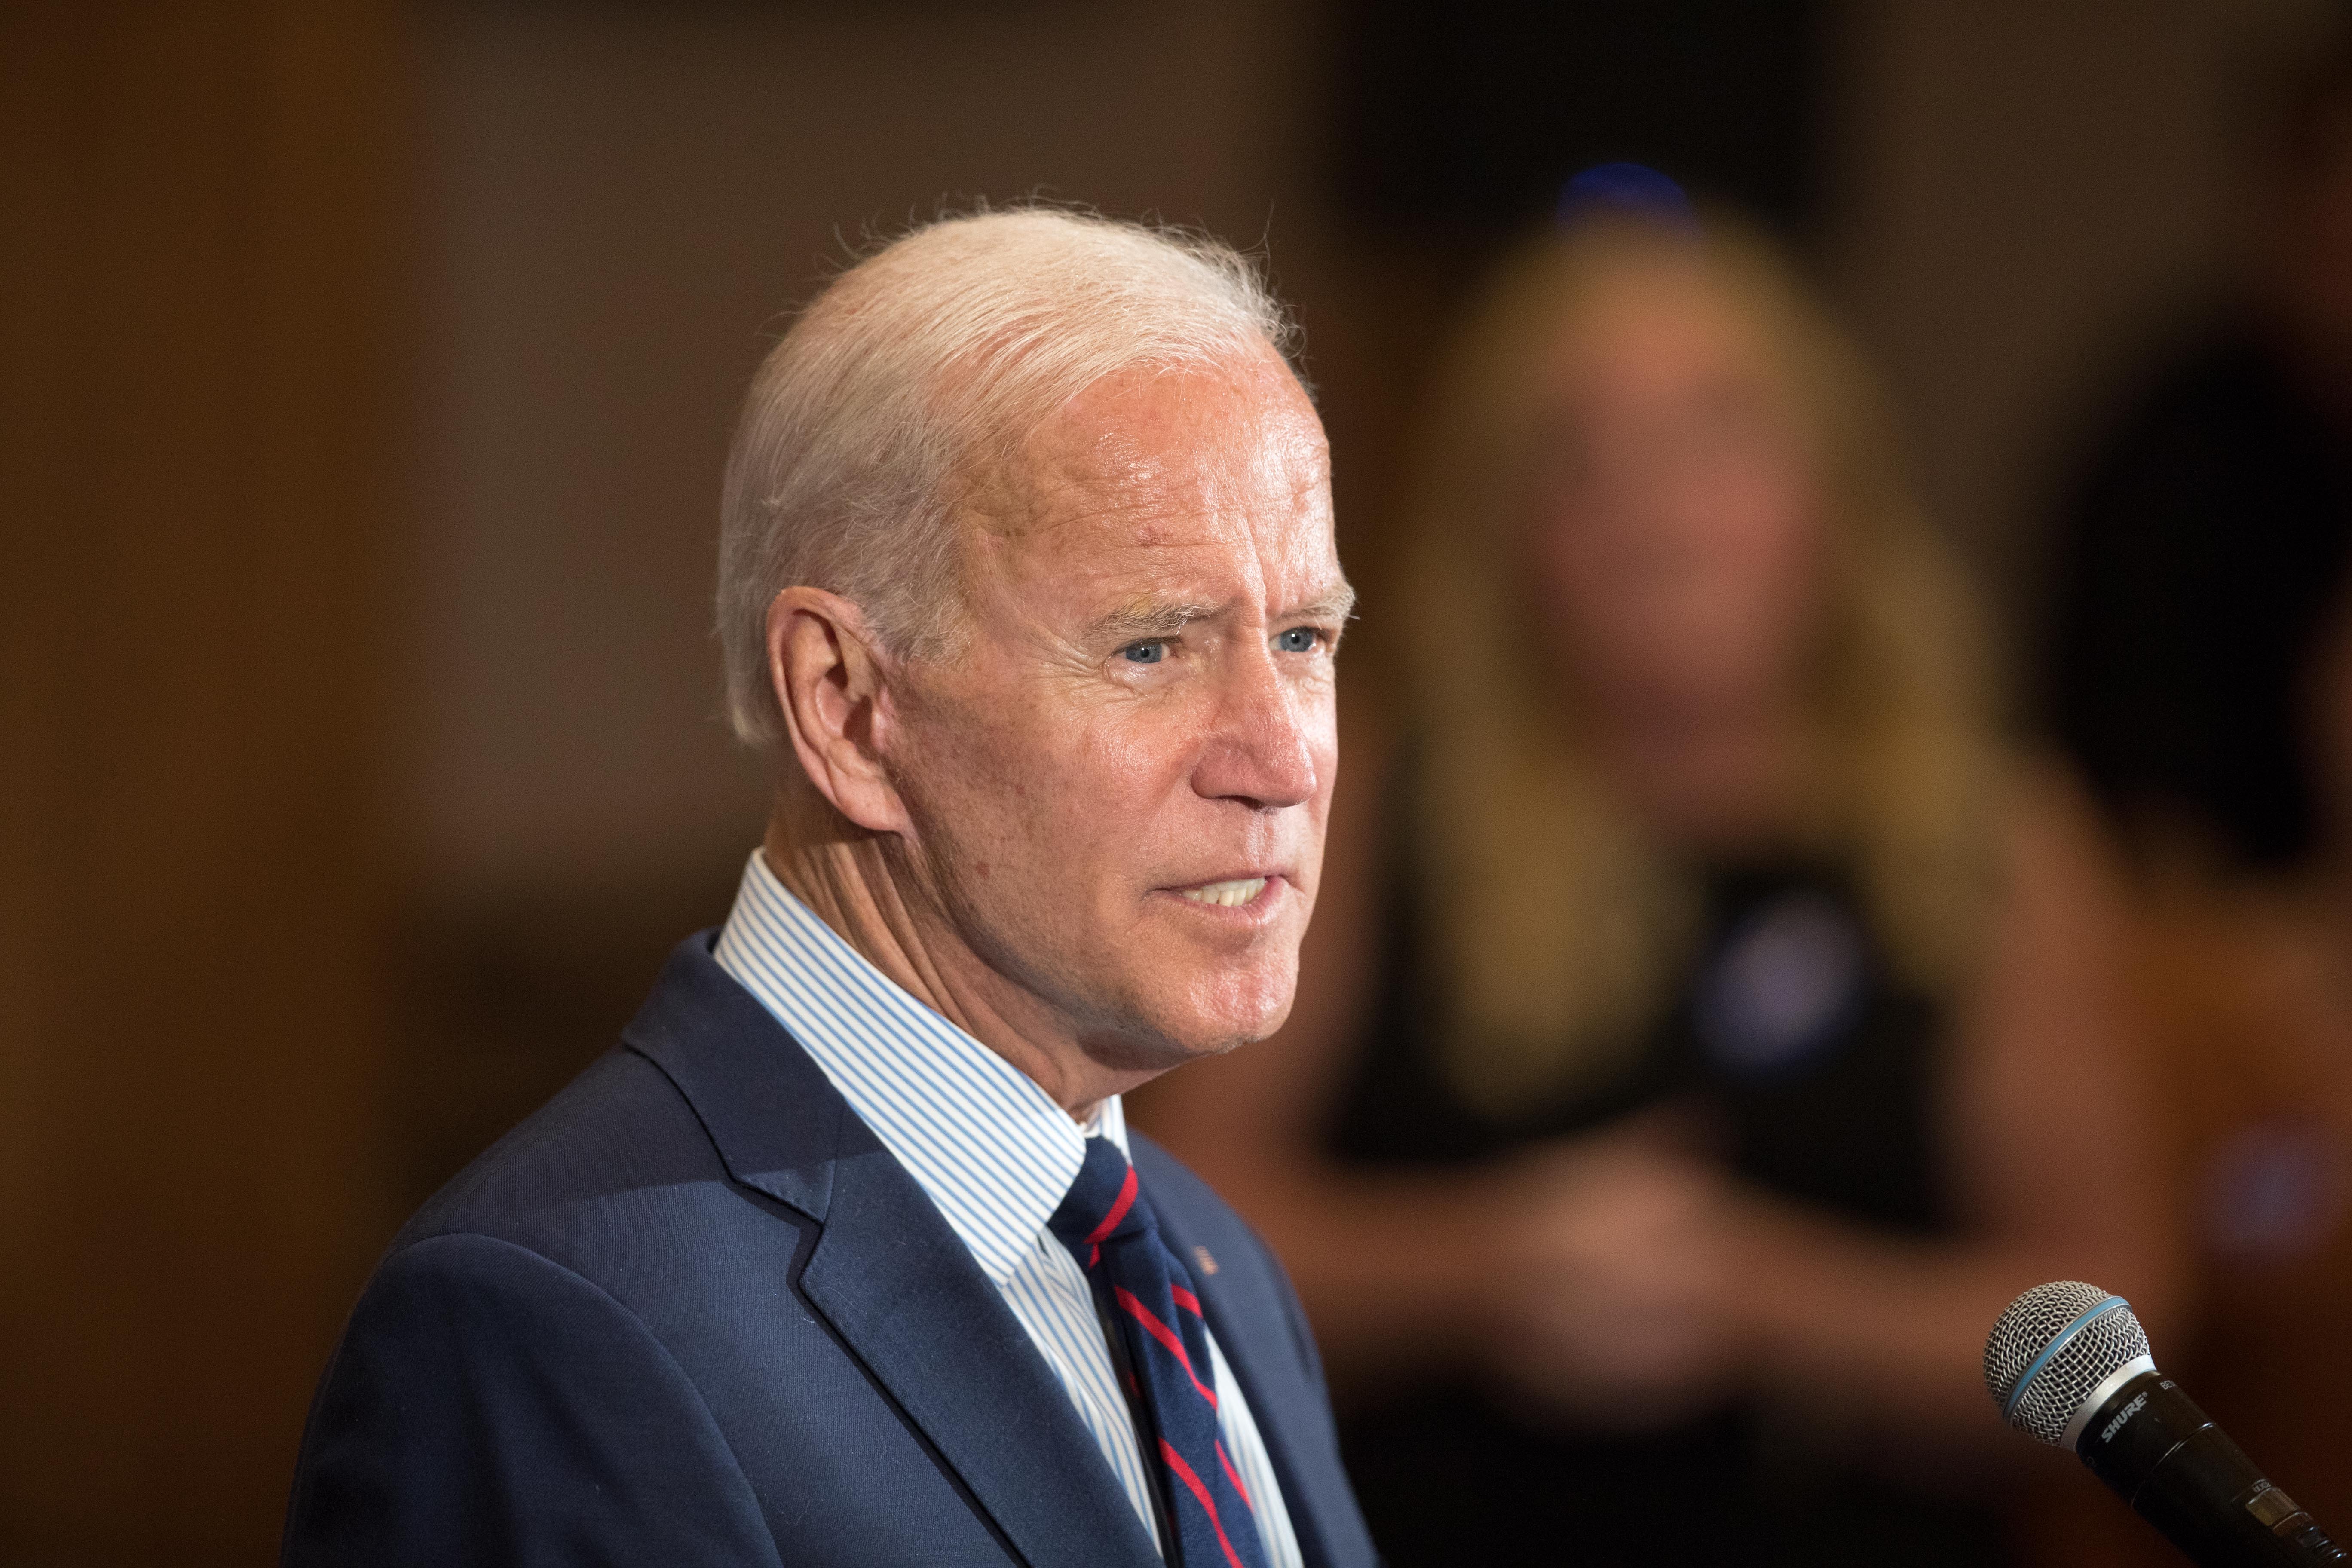 Democratic presidential candidate and former Vice President Joe Biden in Manchester, New Hampshire, on October 9, 2019 in Manchester, New Hampshire.